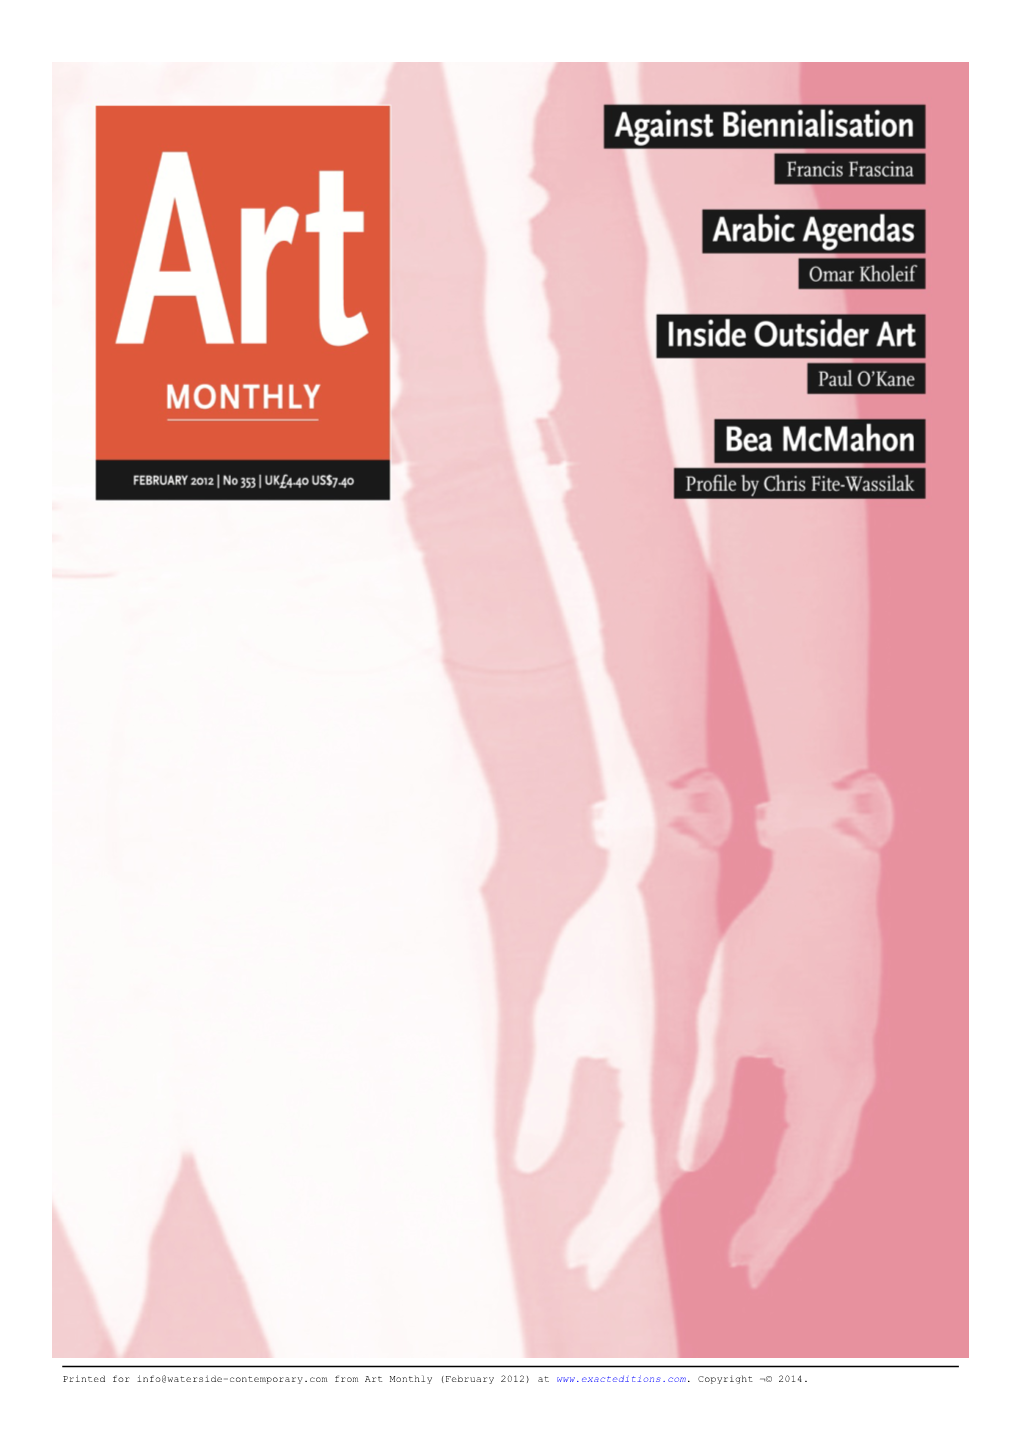 Performance Matters, Review by Morgan Quaintance, Art Monthly